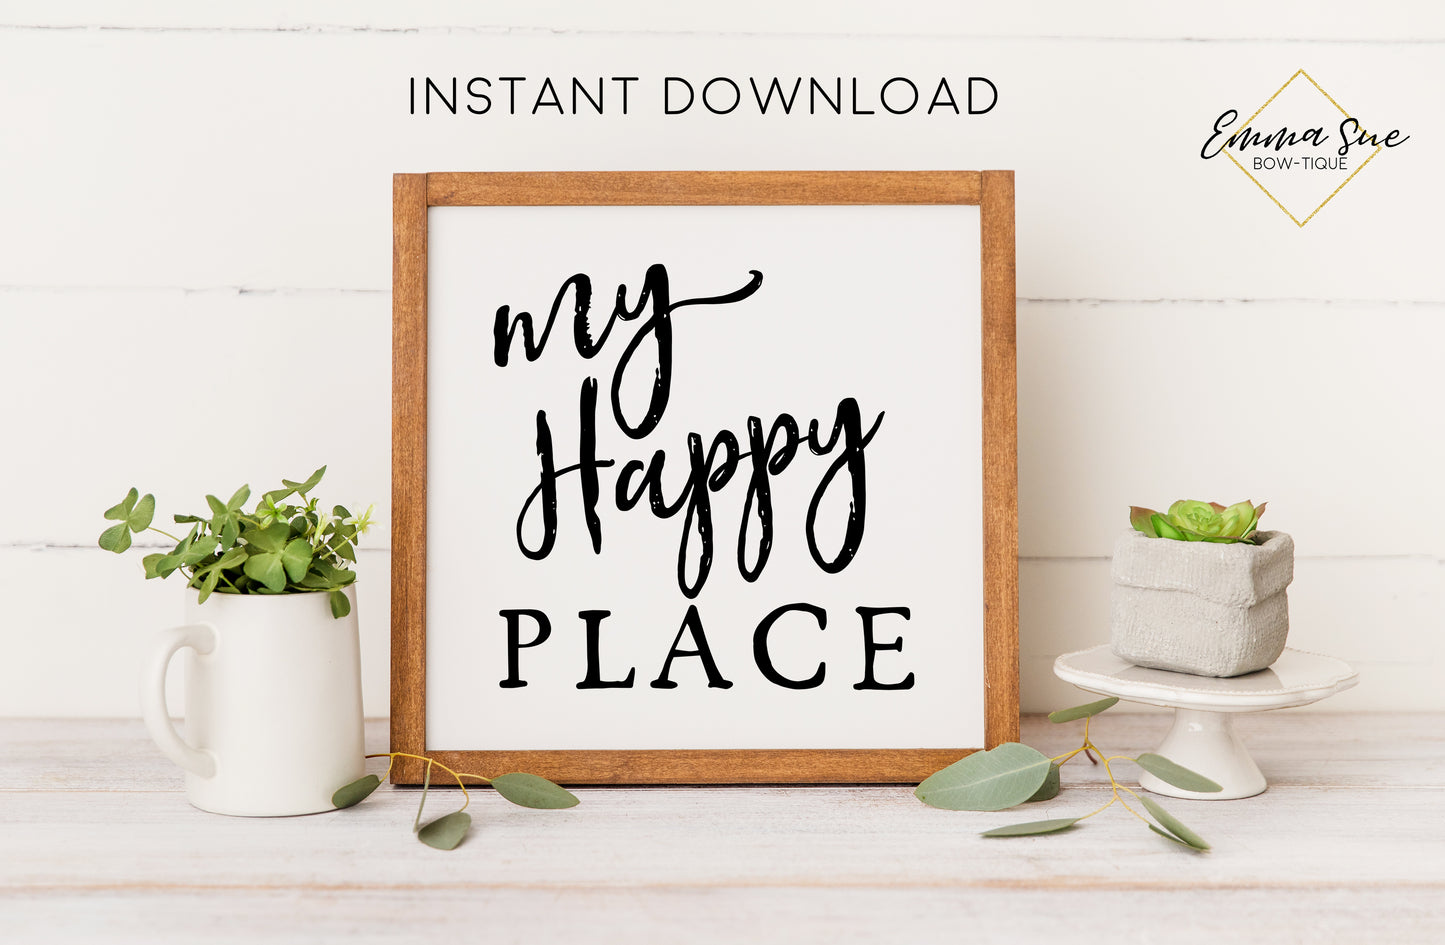 My Happy Place - Living Room Farmhouse Printable Sign Wall Art - Digital File